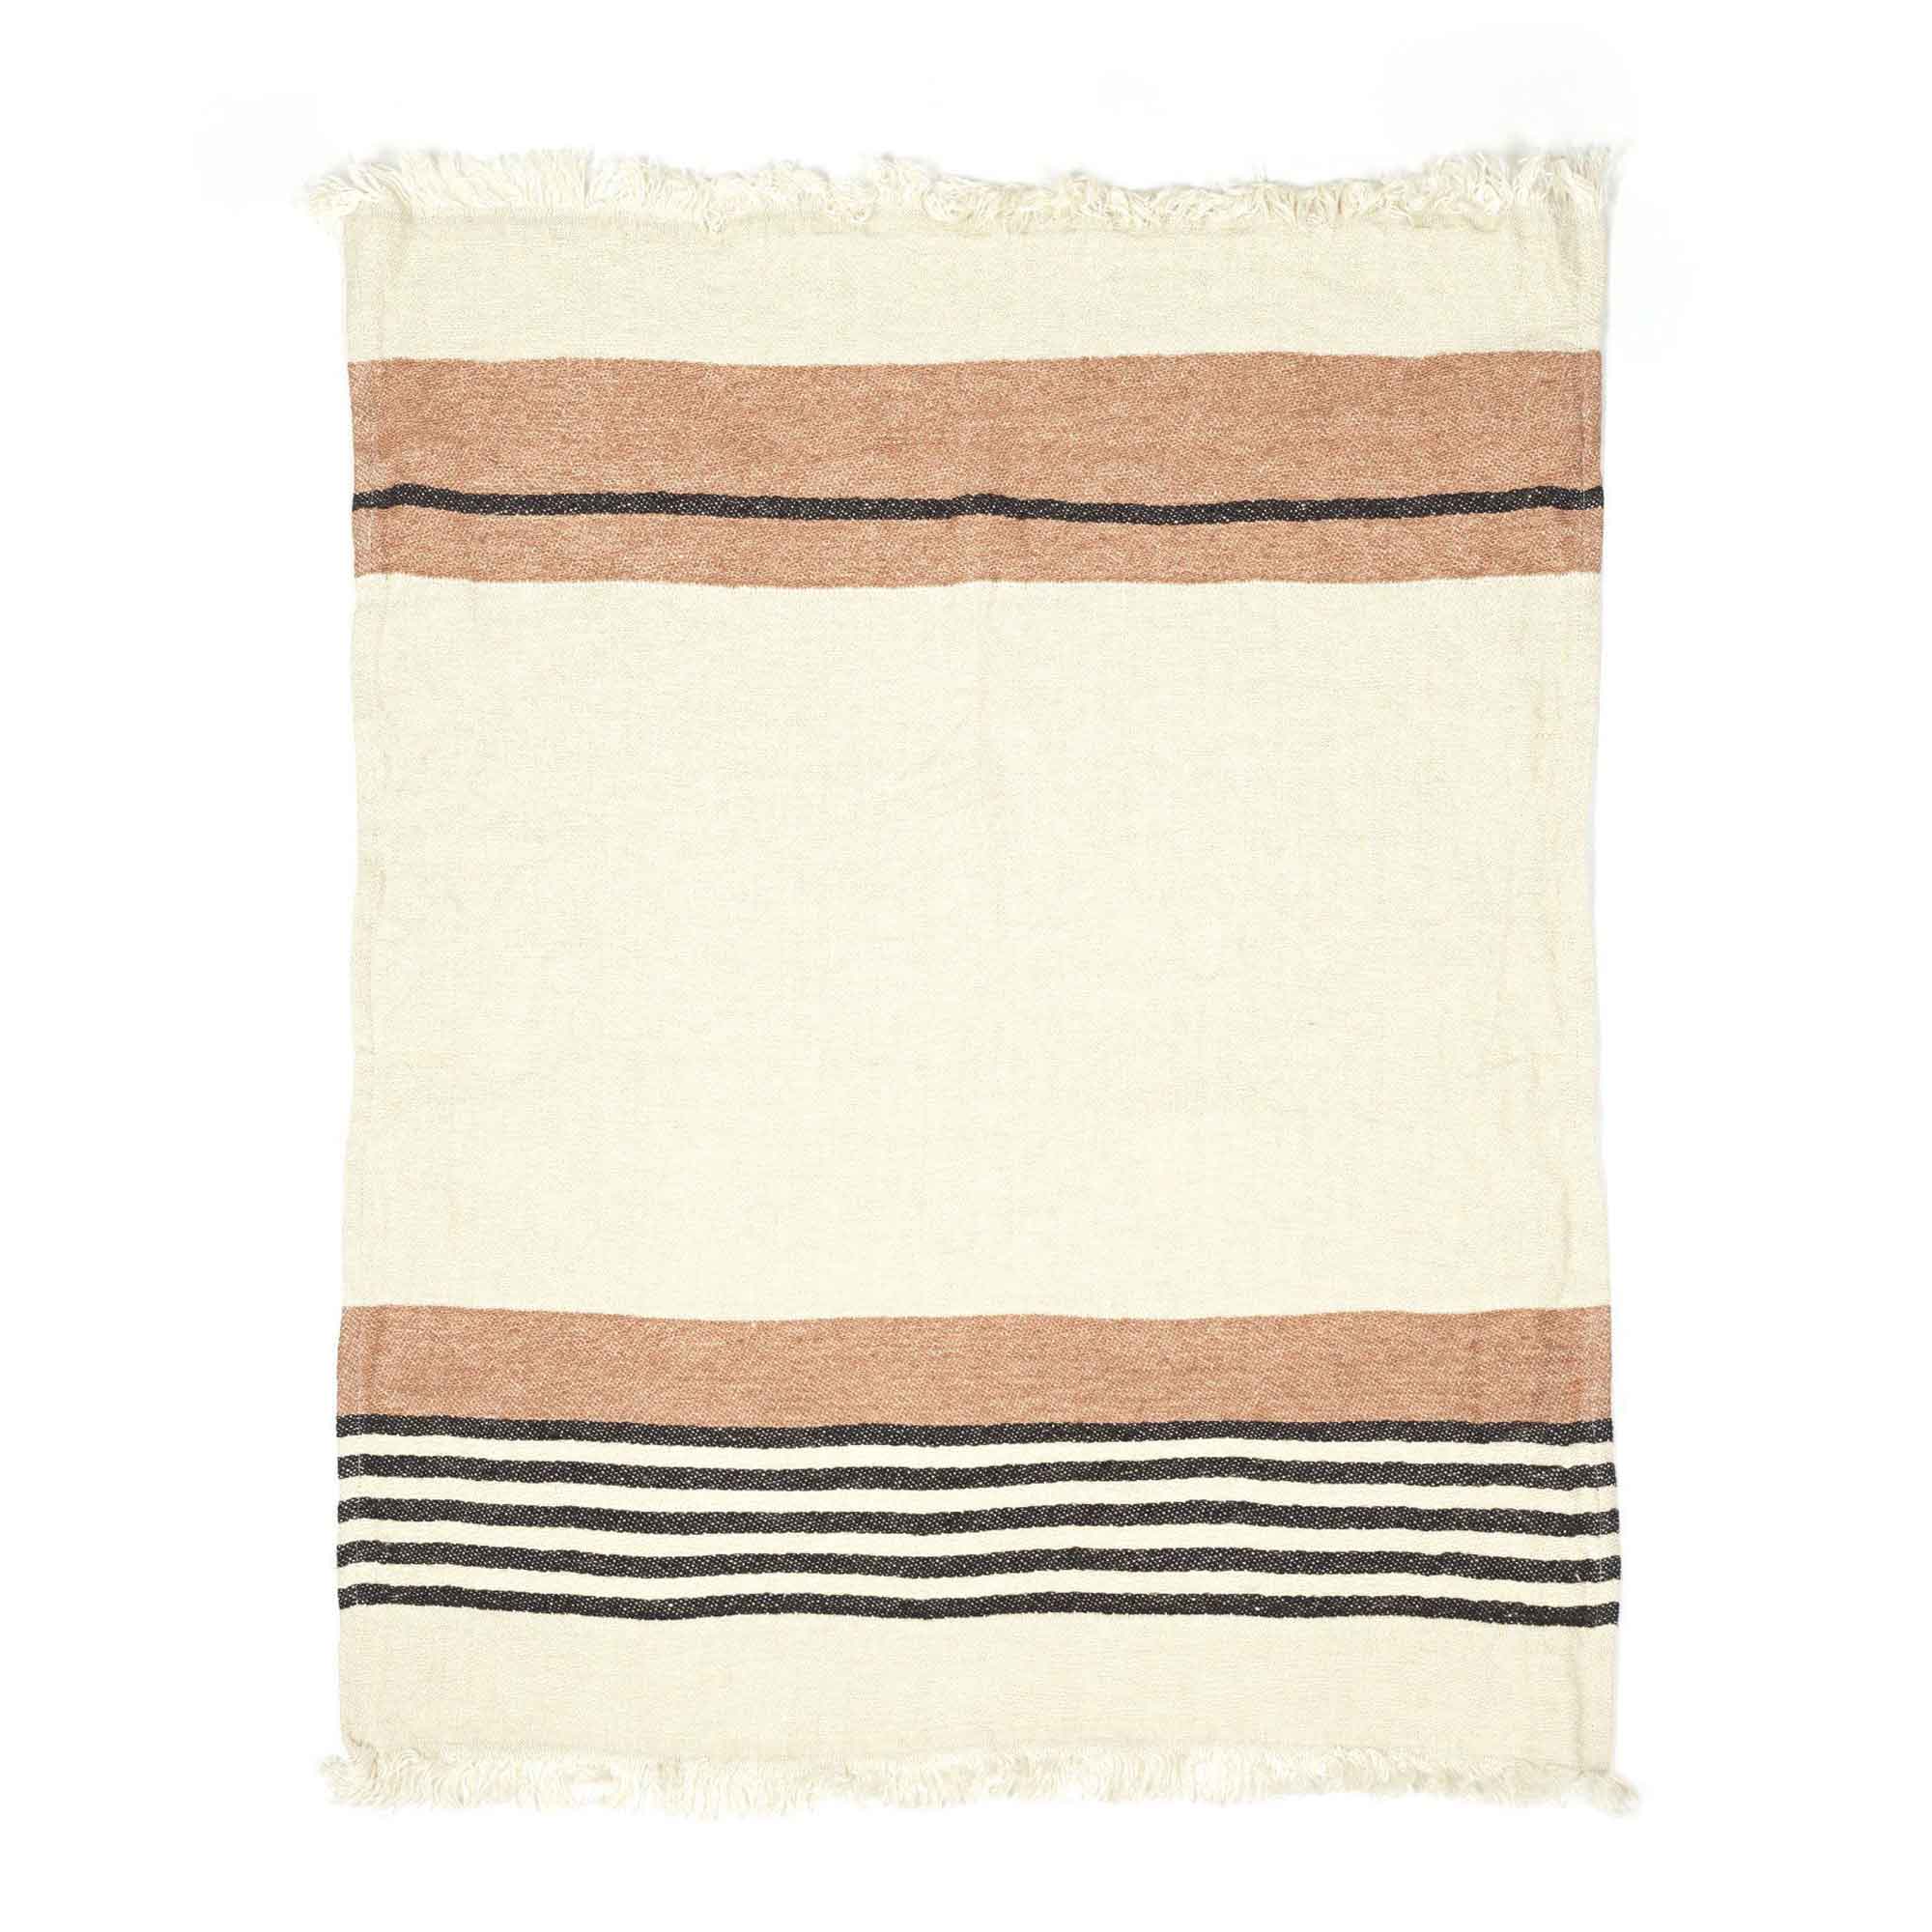 Belgian linen fouta throw blanket flat lay product shot in color Inyo by Libeco for South Hous.